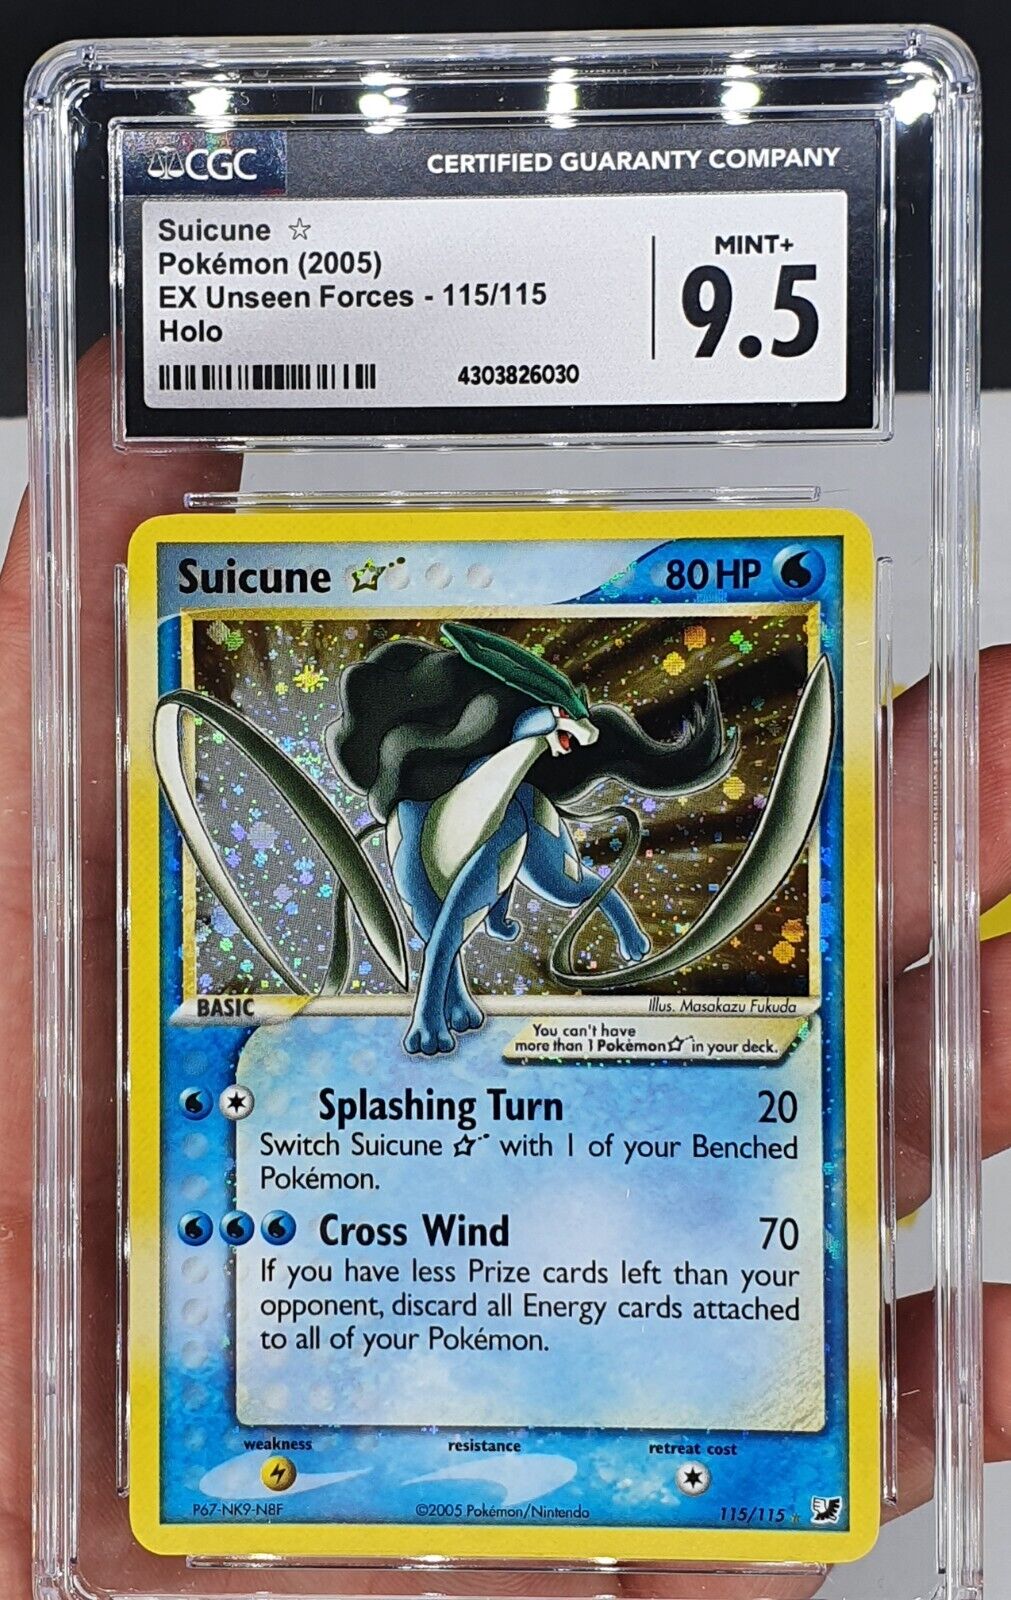 CGC 95 MINT Suicune Gold Star EX Unseen Forces Pokemon PSA